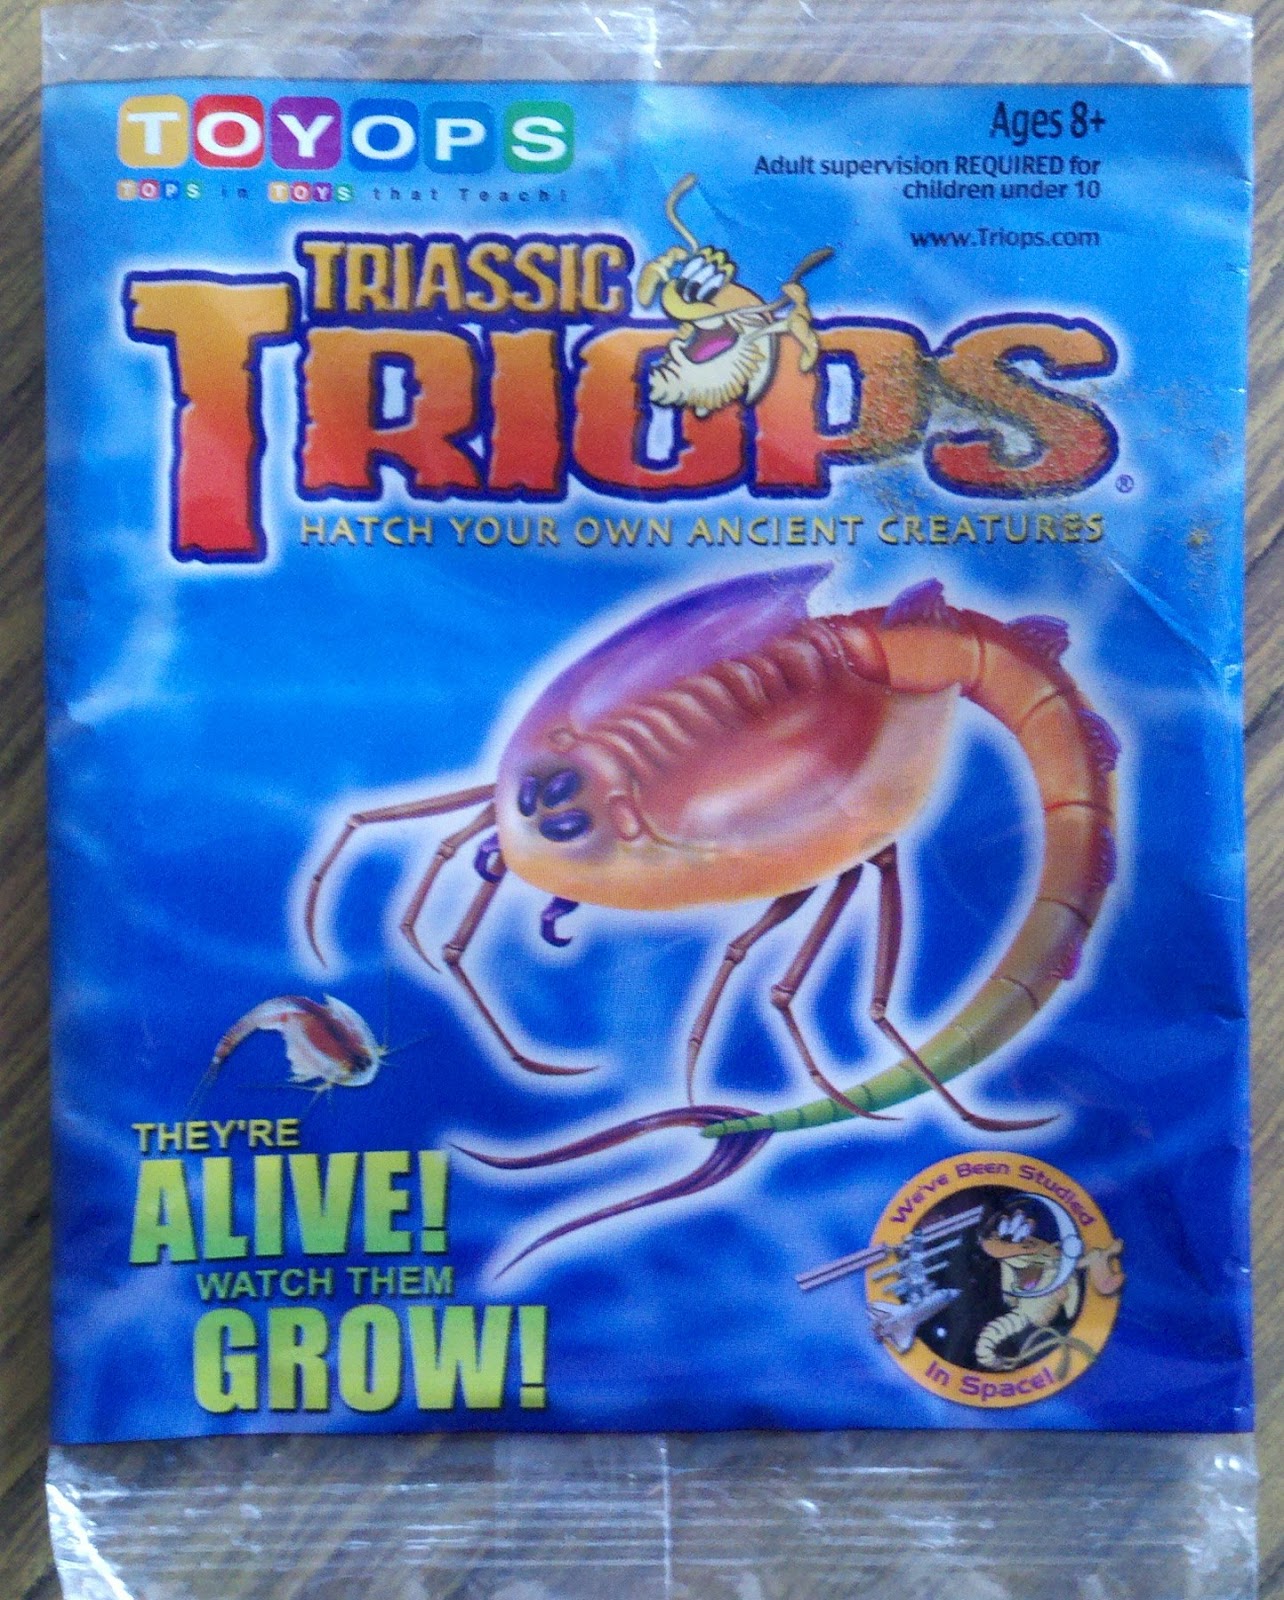 TRIASSIC TRIOPS - Deluxe Triops Kit, Contains Eggs, Aquarium, Food,  Instructions and Helpful Hints to Hatch and Grow Your Own Prehistoric  Creatures, Fun Educational Toy for Kids 